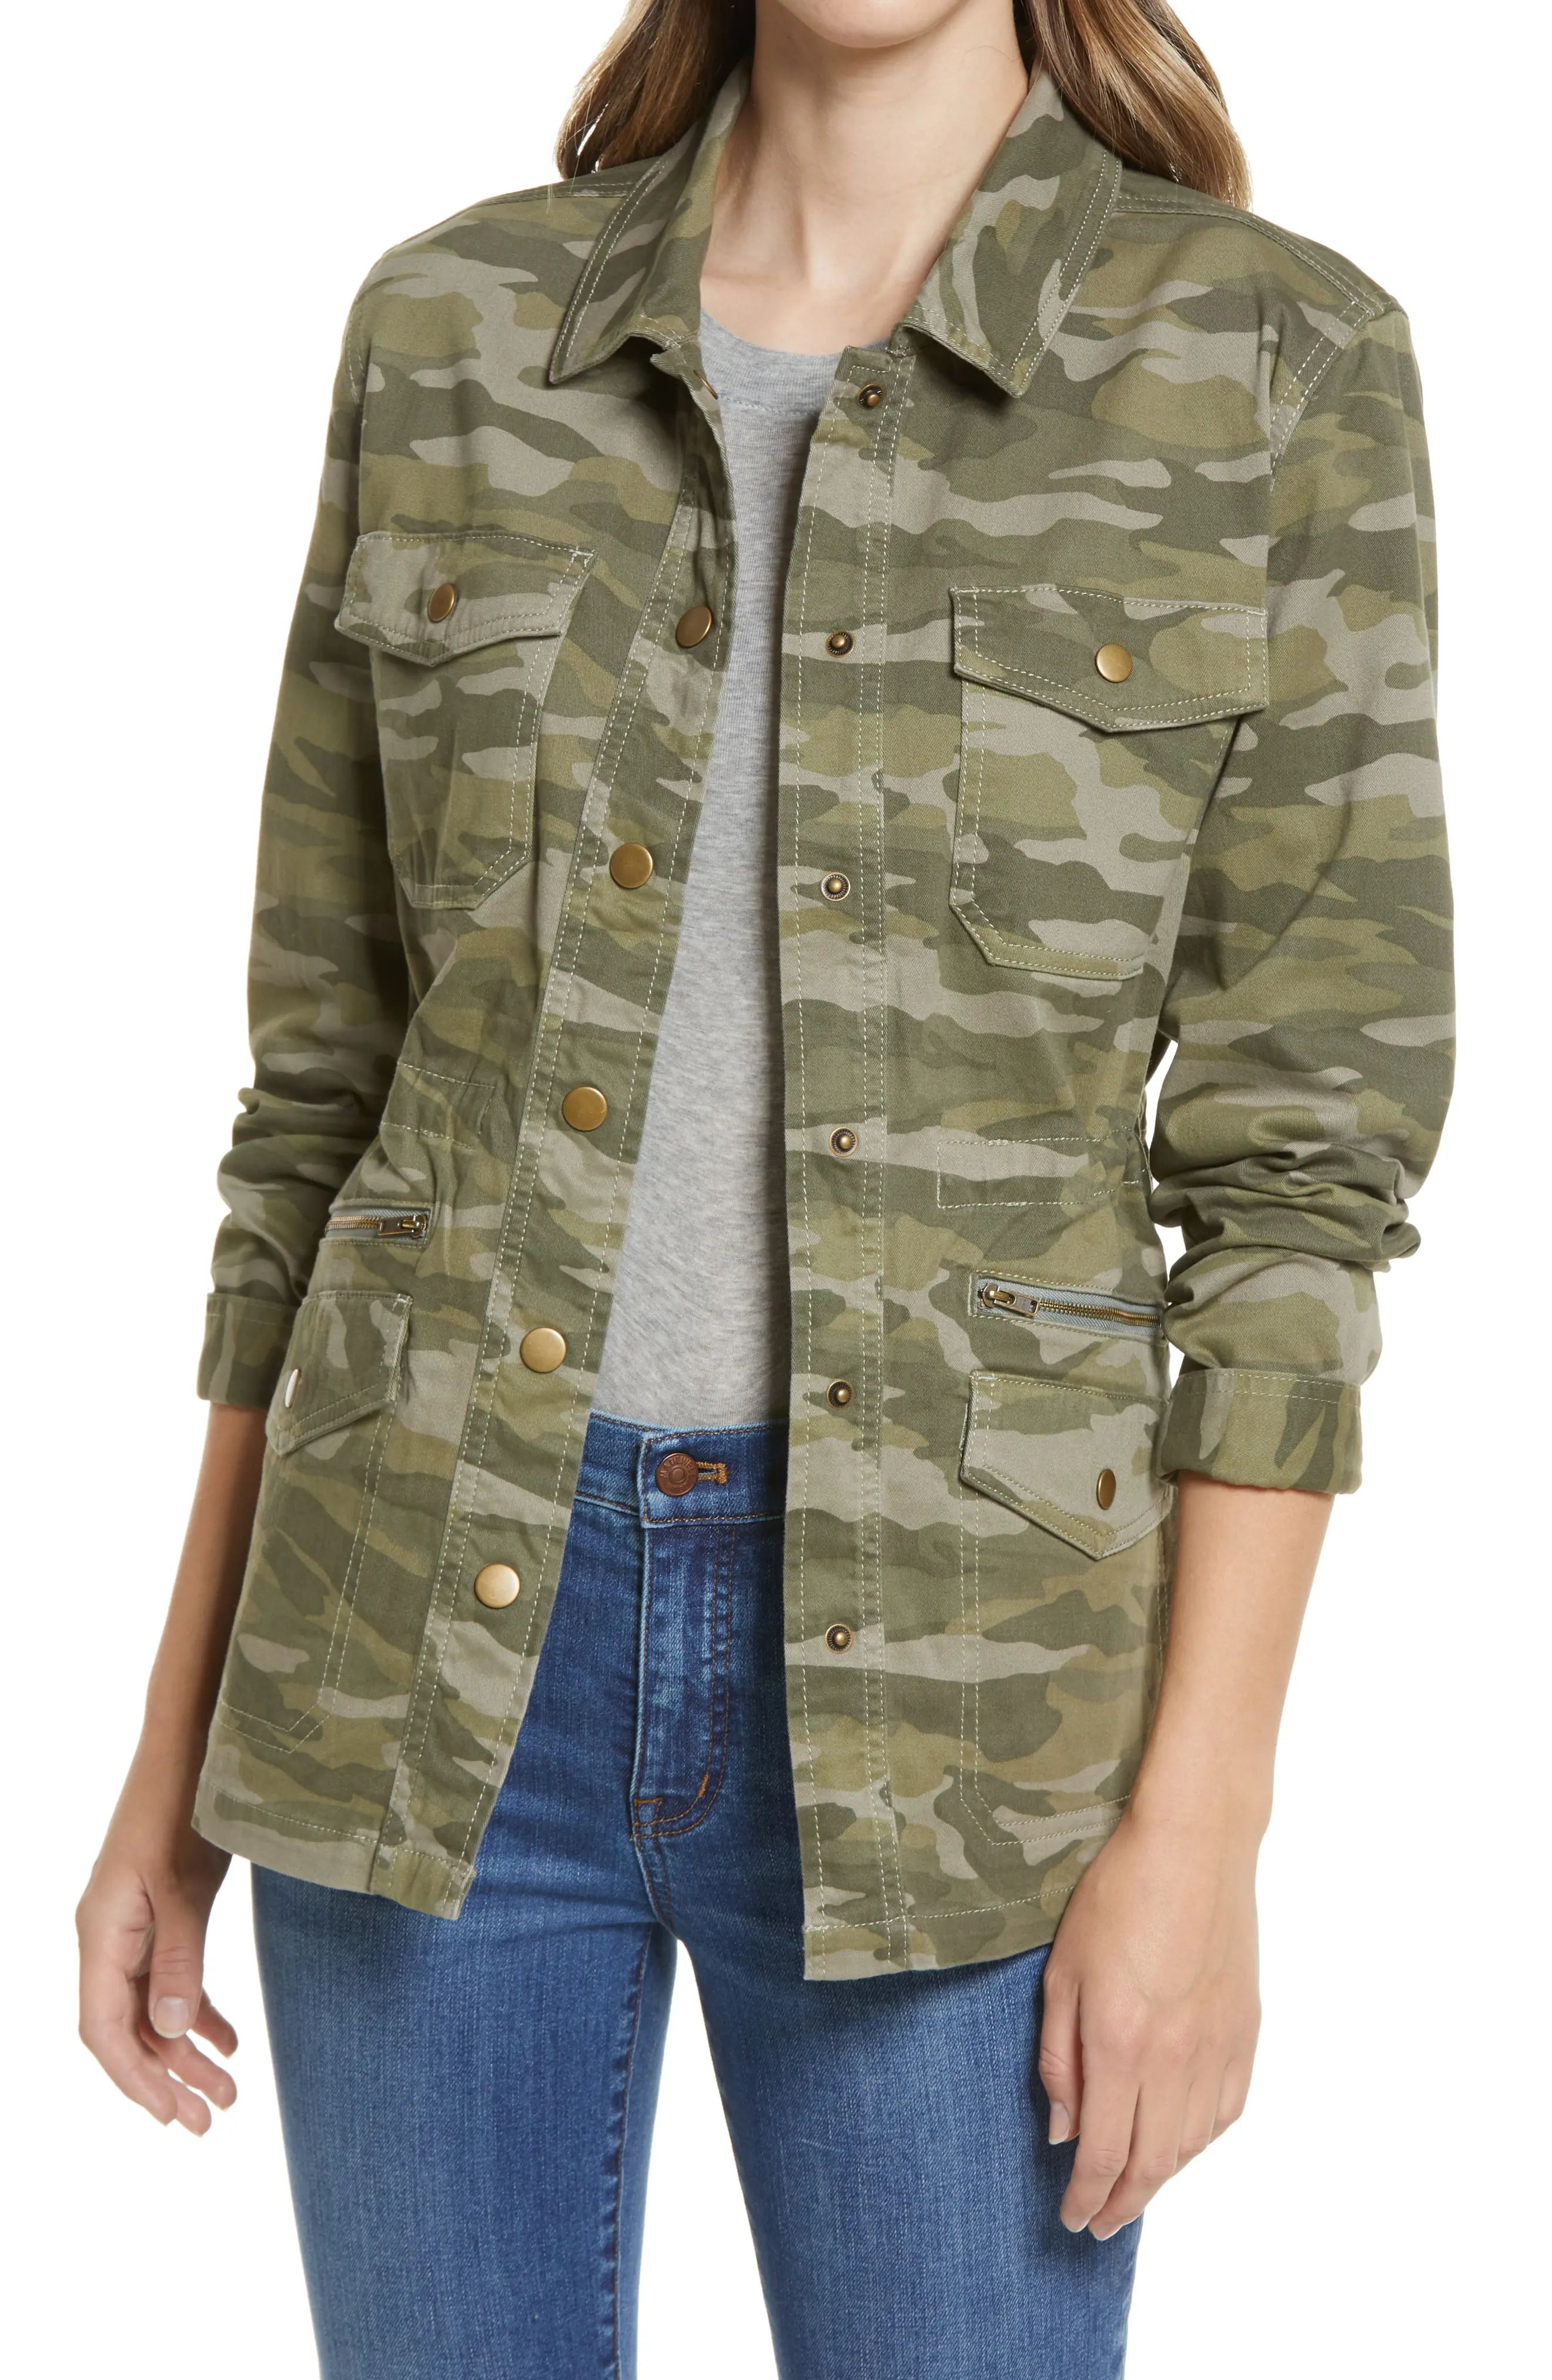 Caslon(R) Camo Utility Jacket in Olive Camo at Nordstrom, Size Small | Nordstrom